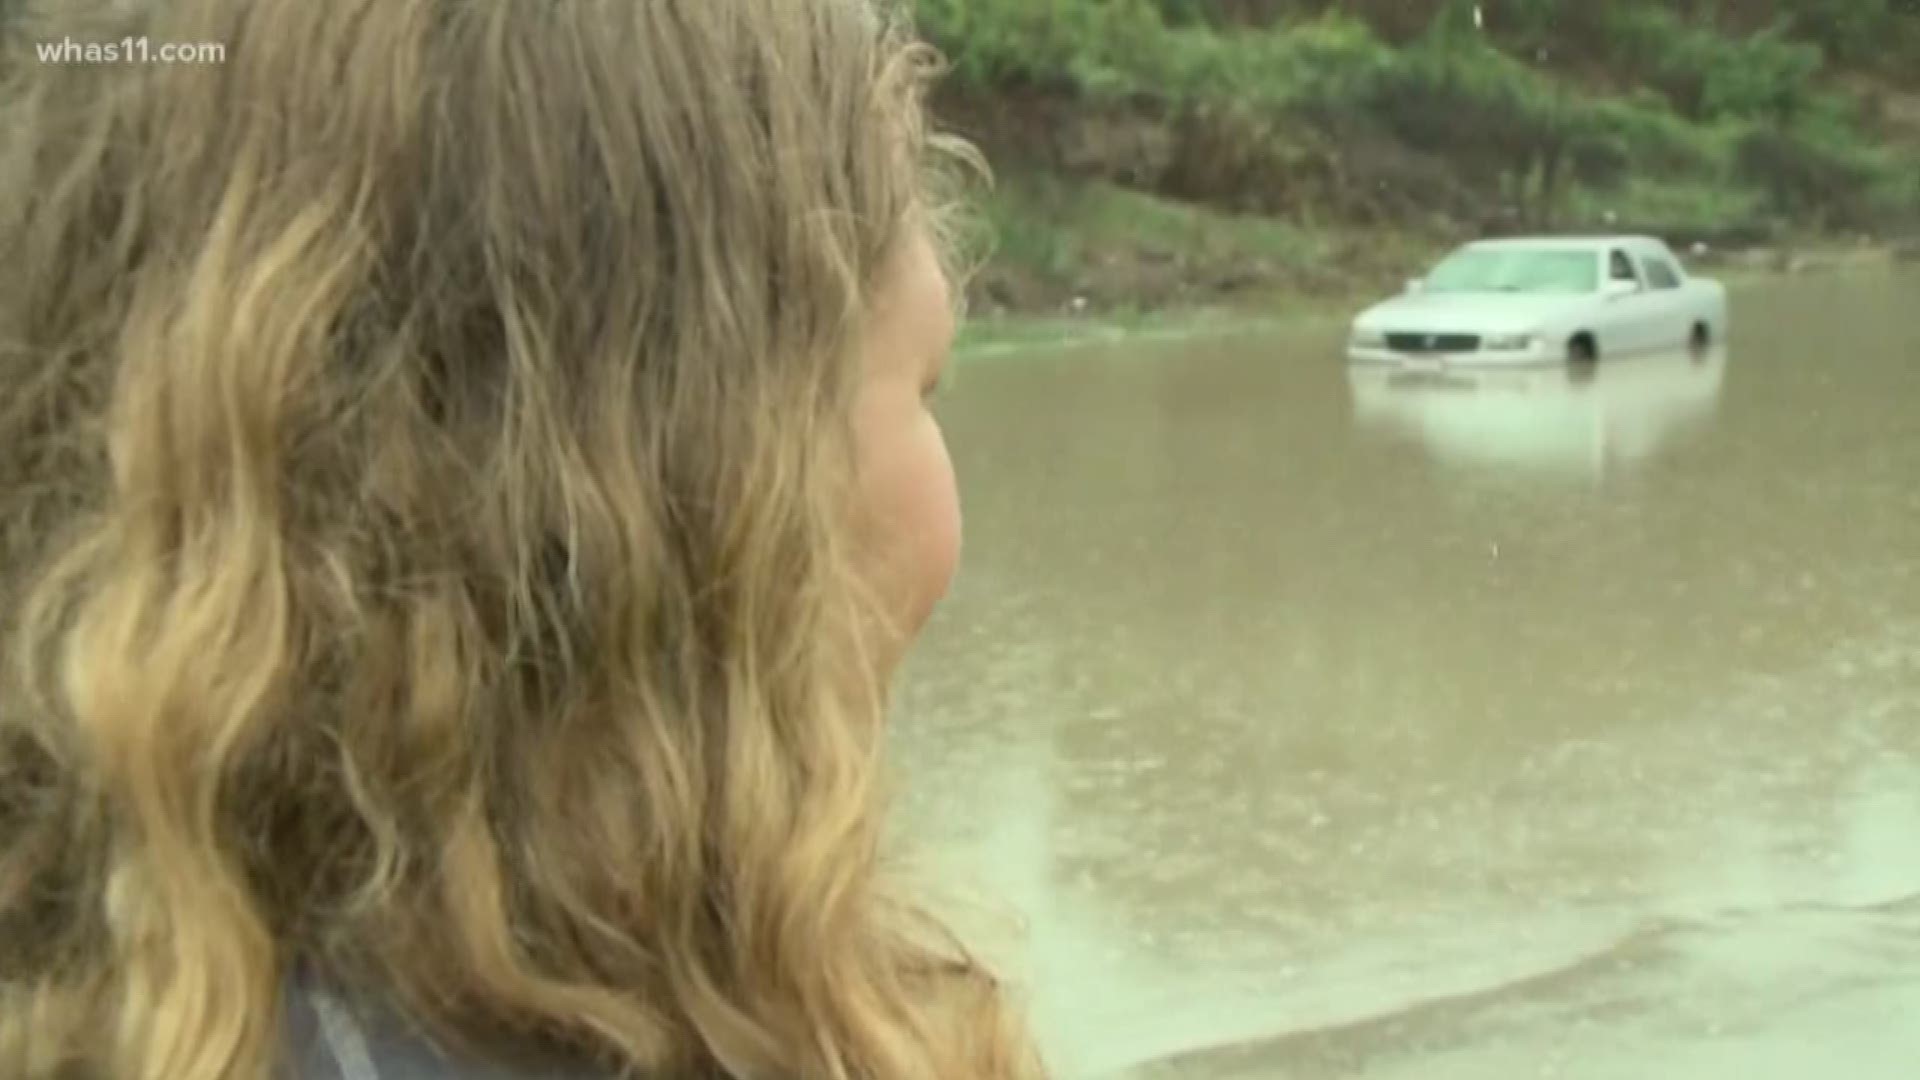 Heavy rain, rising water causes issues in Louisville